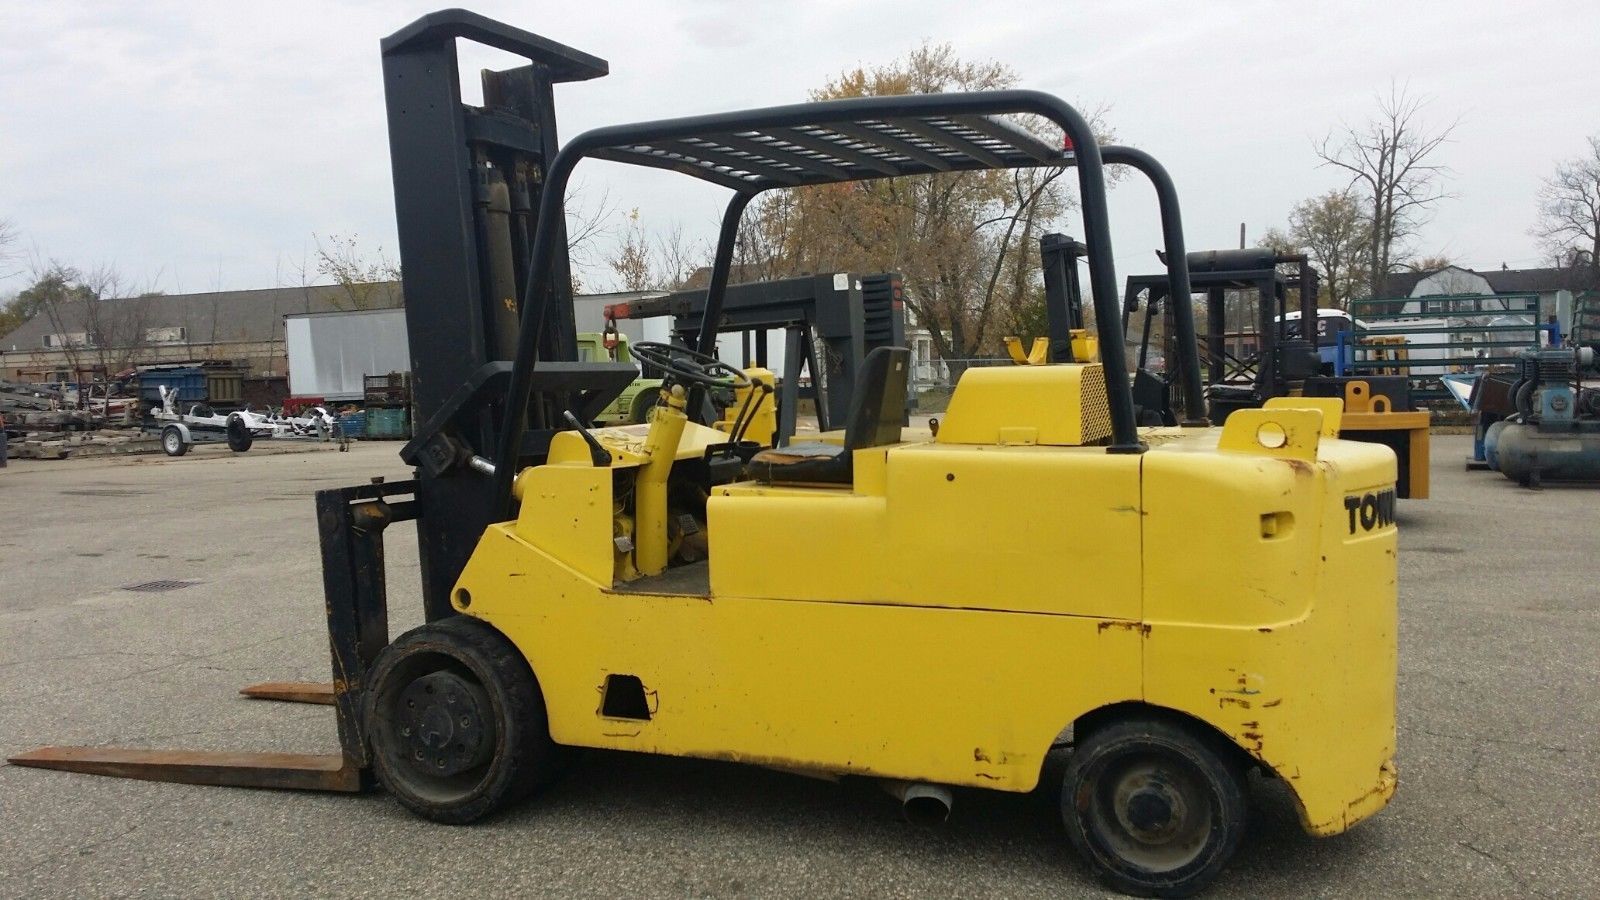 25,000lb. Capacity Cat/Towmotor Forklift For Sale 25kCatTowmotorFL